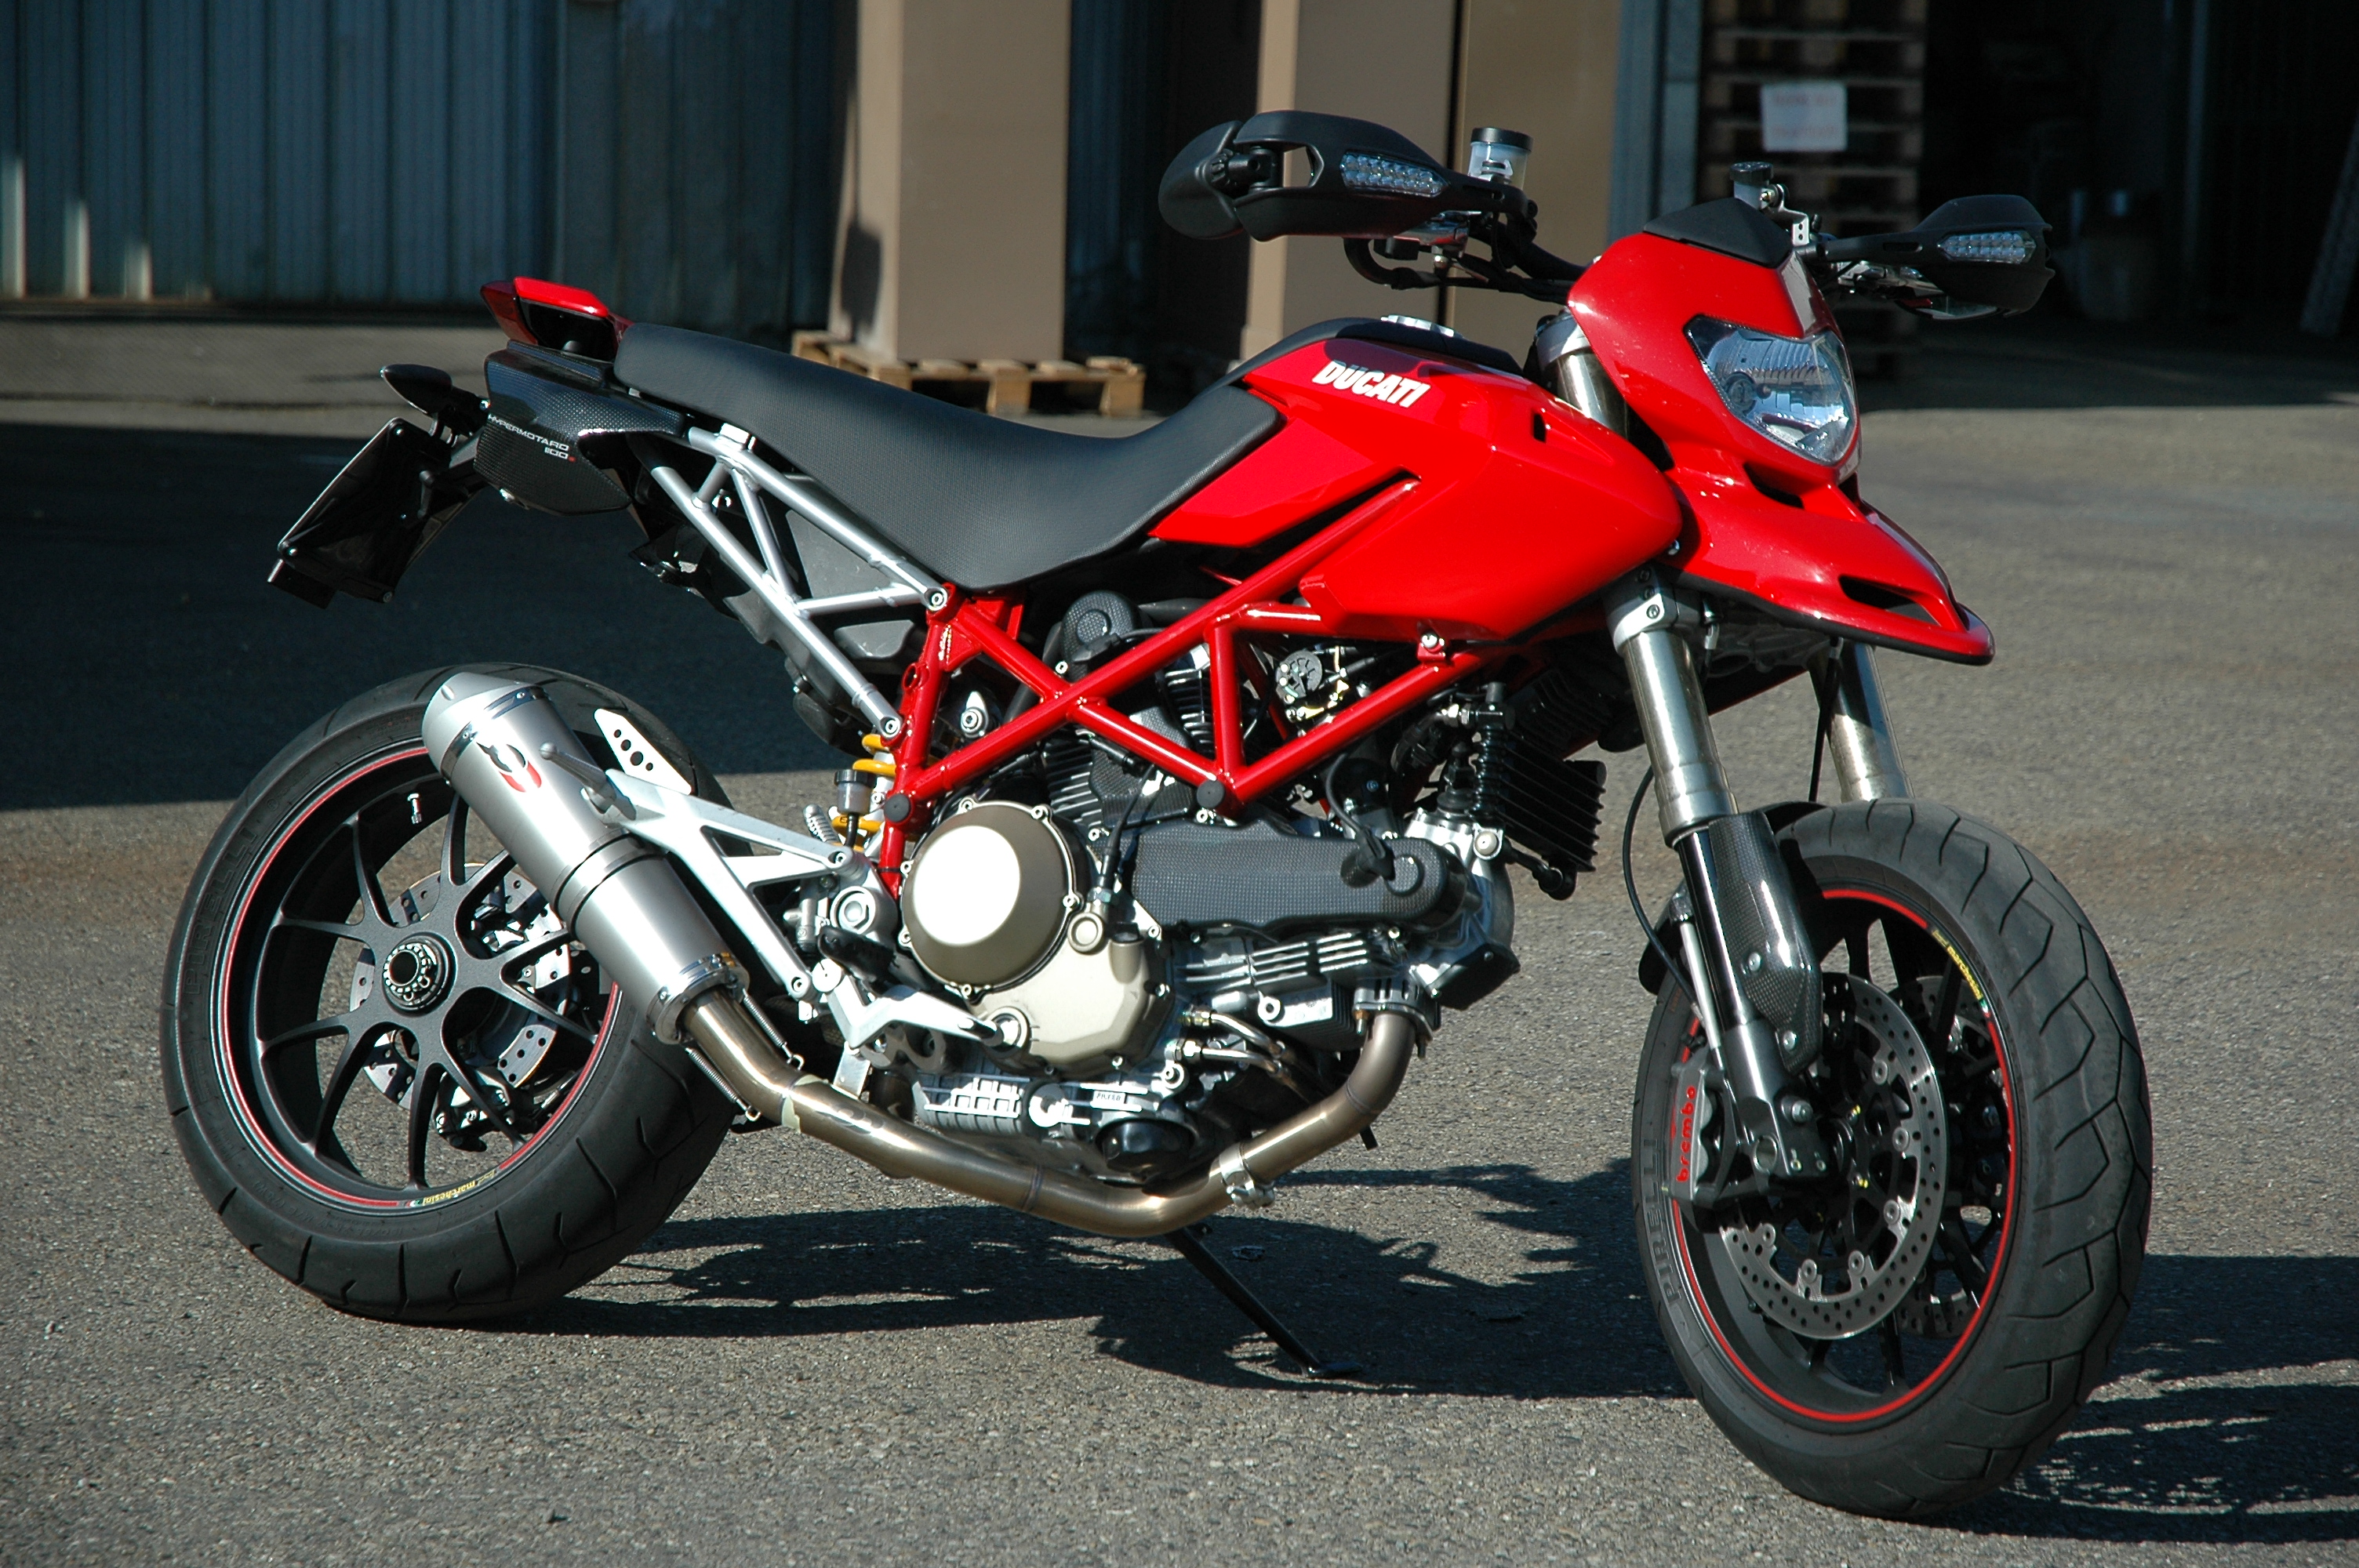 Ducati Hypermotard 1100 '07/'09 2 in 1 full, low-mount right sided